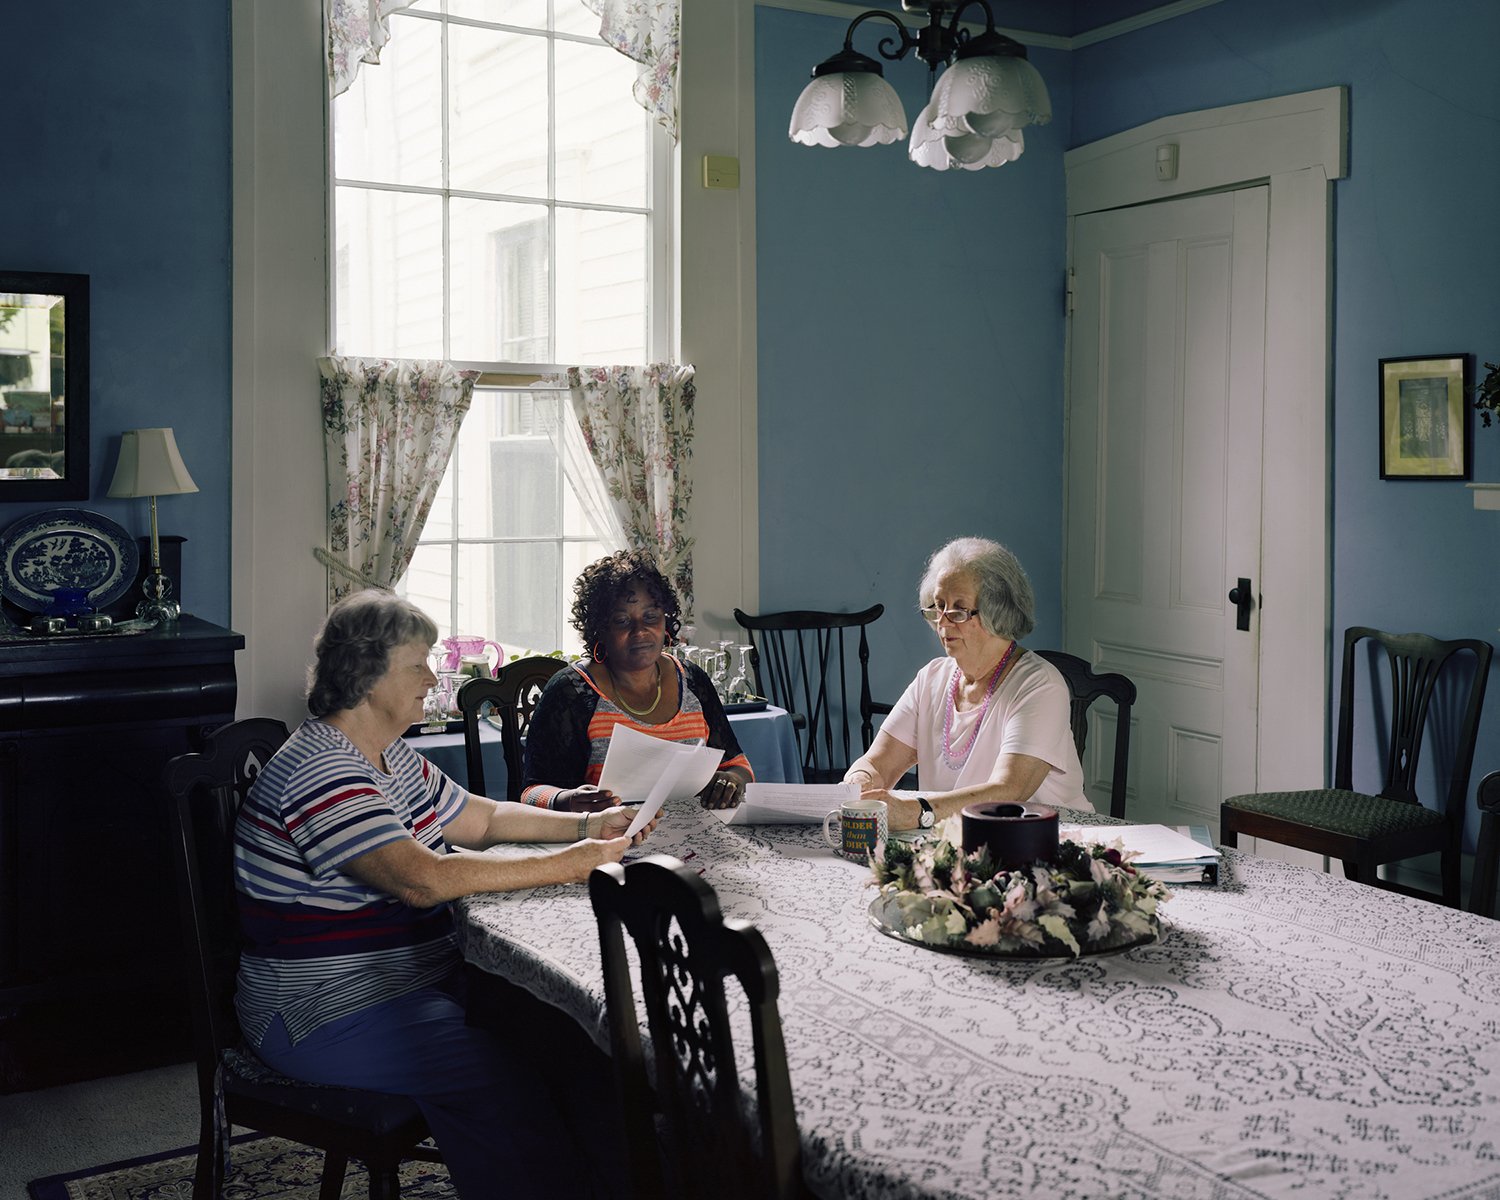   Mary, Esther and Ellis, Uniontown, Alabama  image: 2014/printed: 2020 Archival Pigment Print  20&nbsp;x&nbsp;25&nbsp;in. (image size)  The Do Good Fund, Inc., 2020-012 